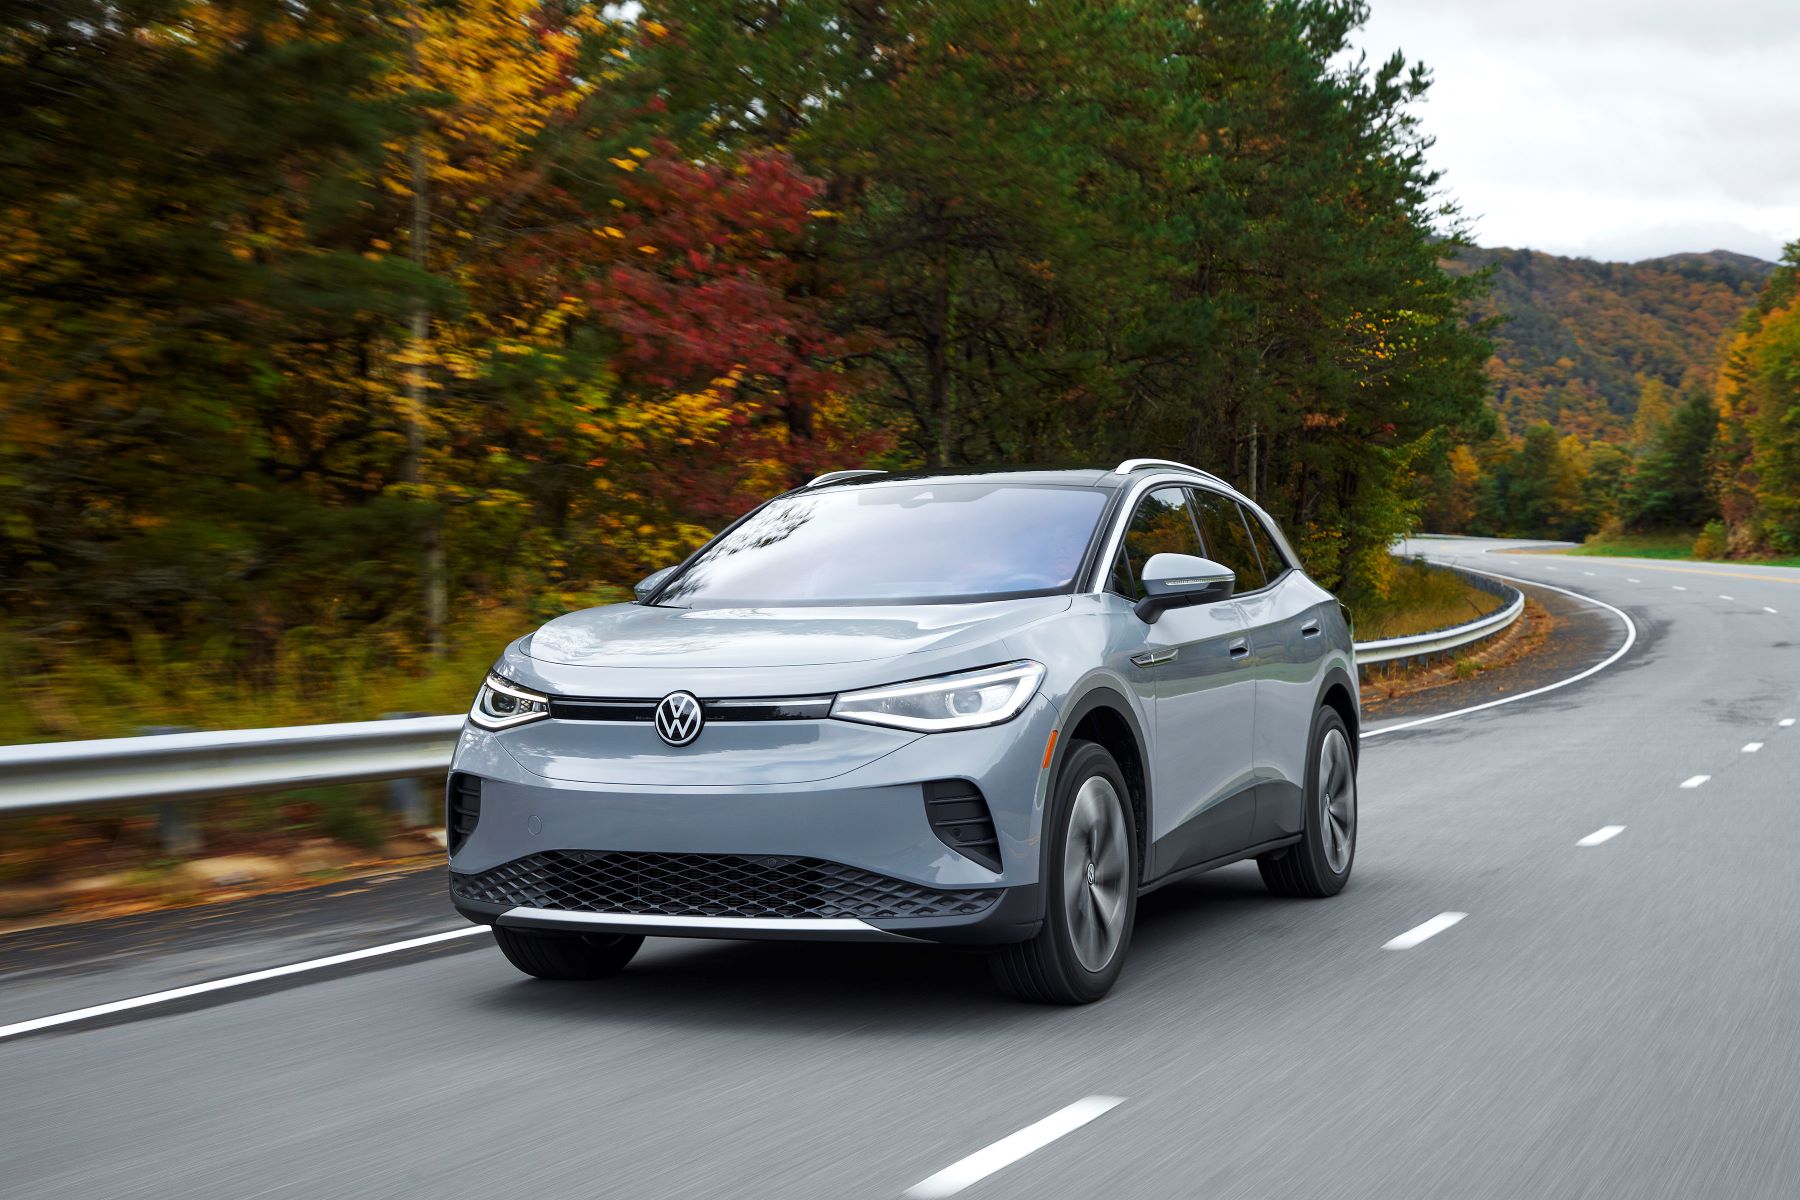 2021 Volkswagen ID.4 AWD all-electric compact SUV in gray driving on a forest highway